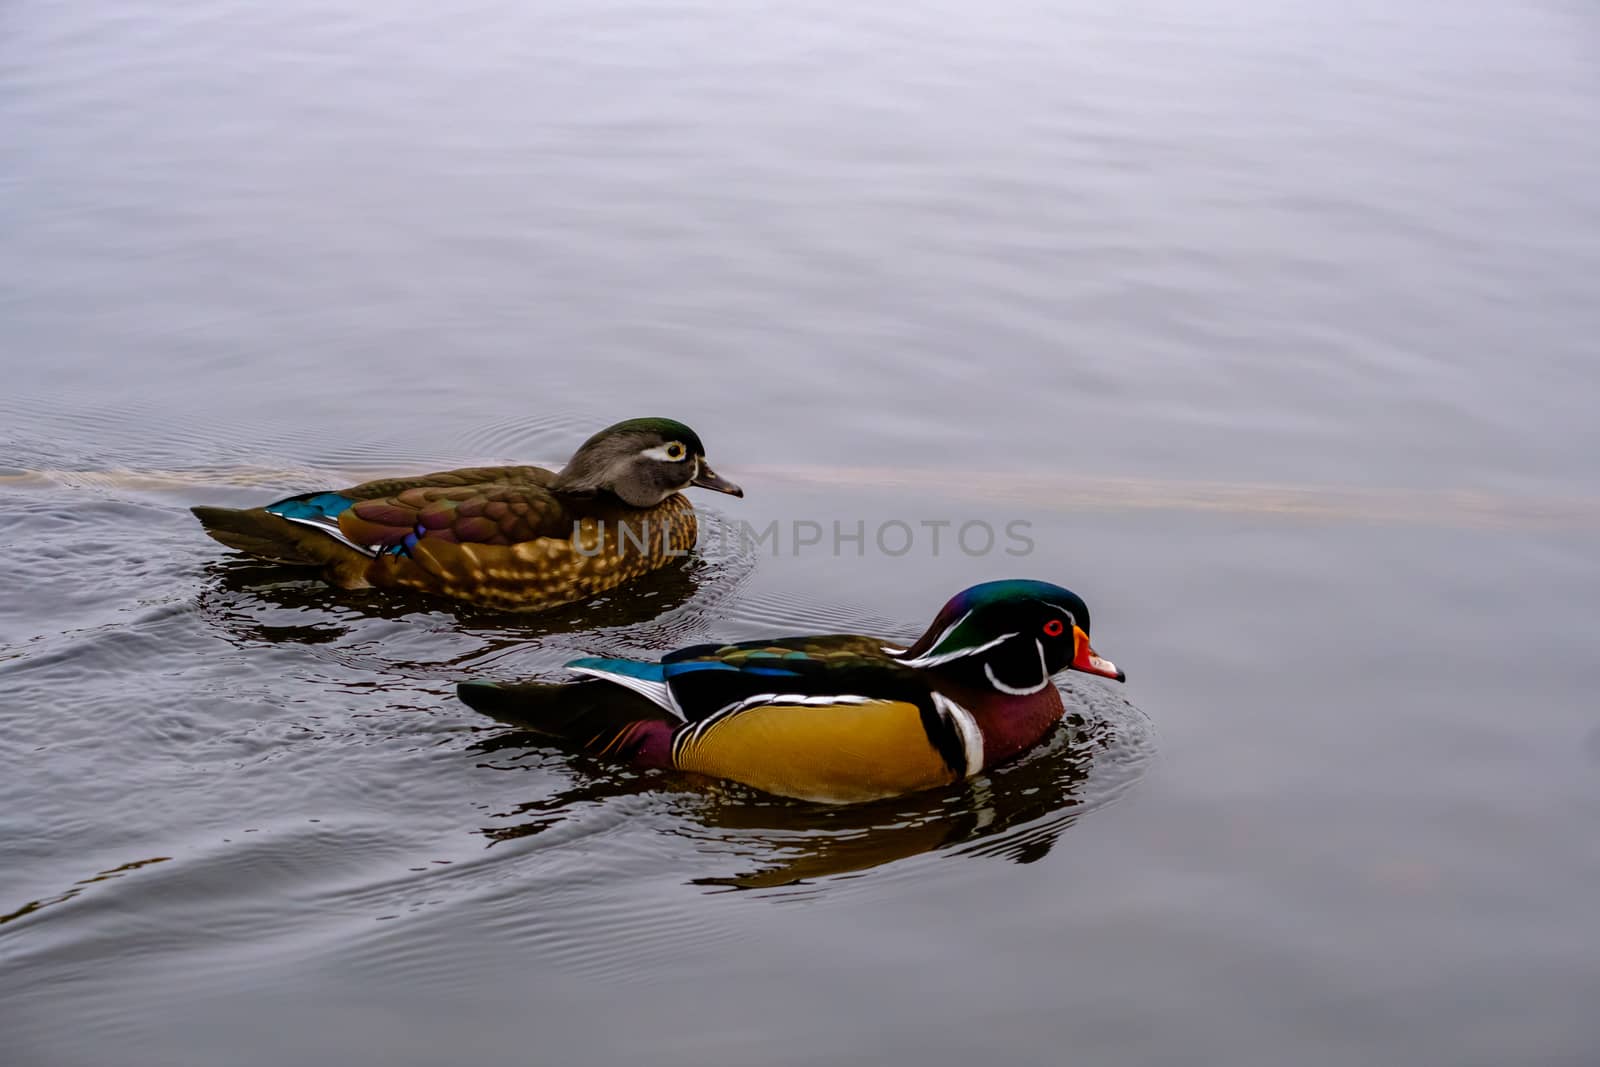 Pair of wood ducks swim together by colintemple